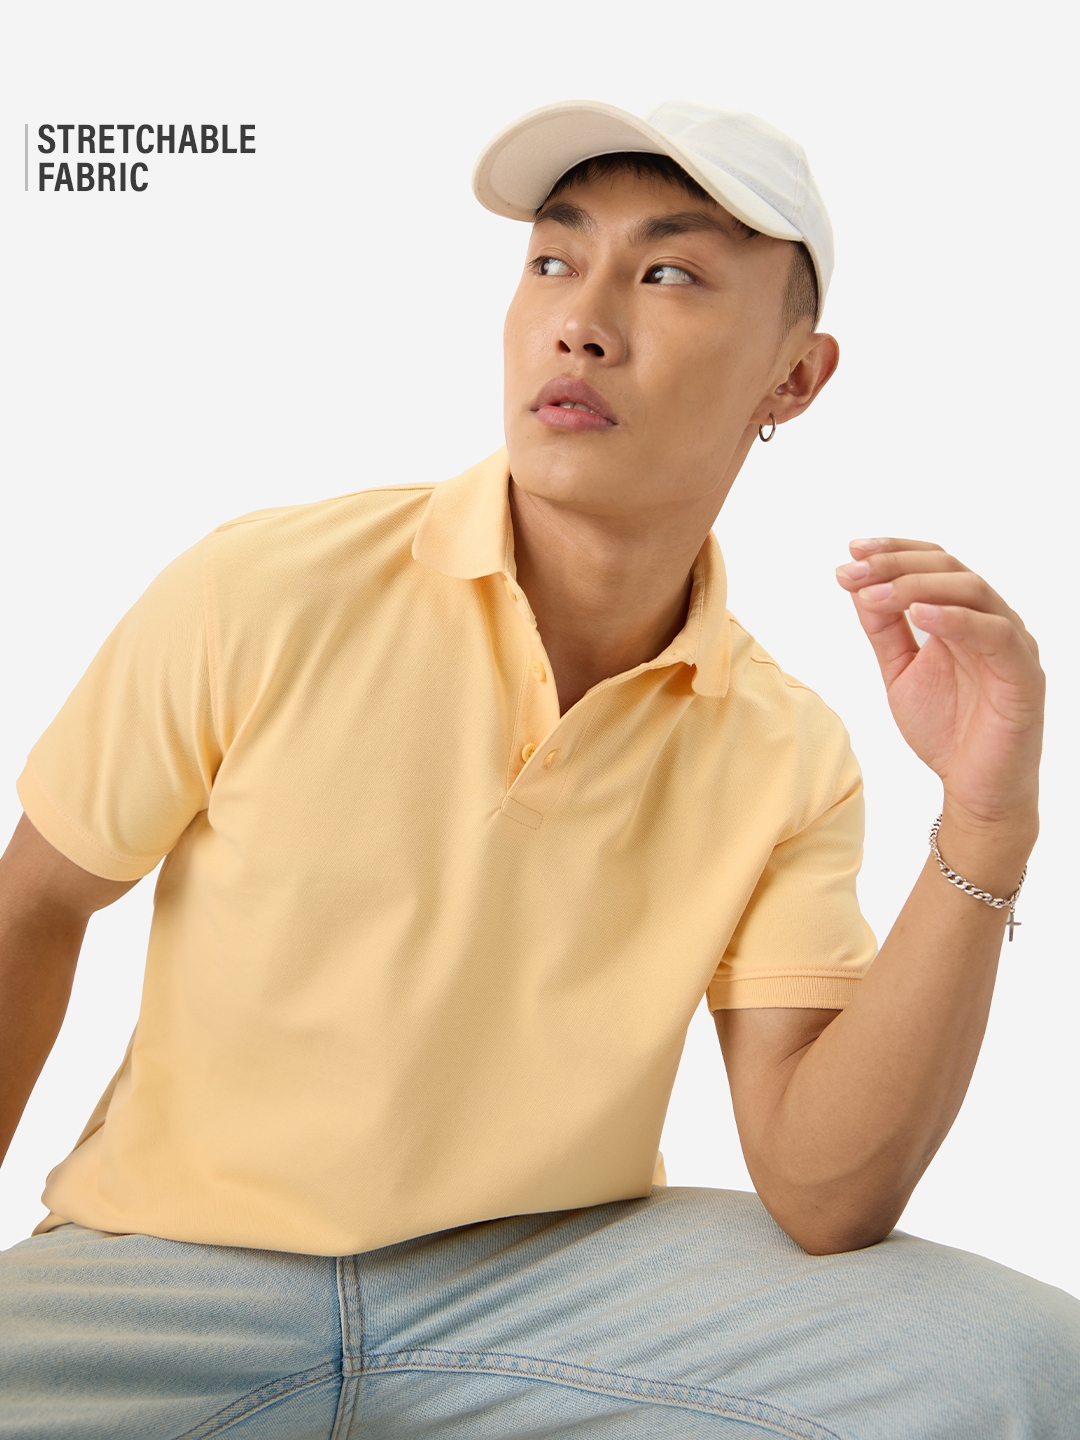 The Souled Store | Men's Solids Limelight Polo T-Shirt